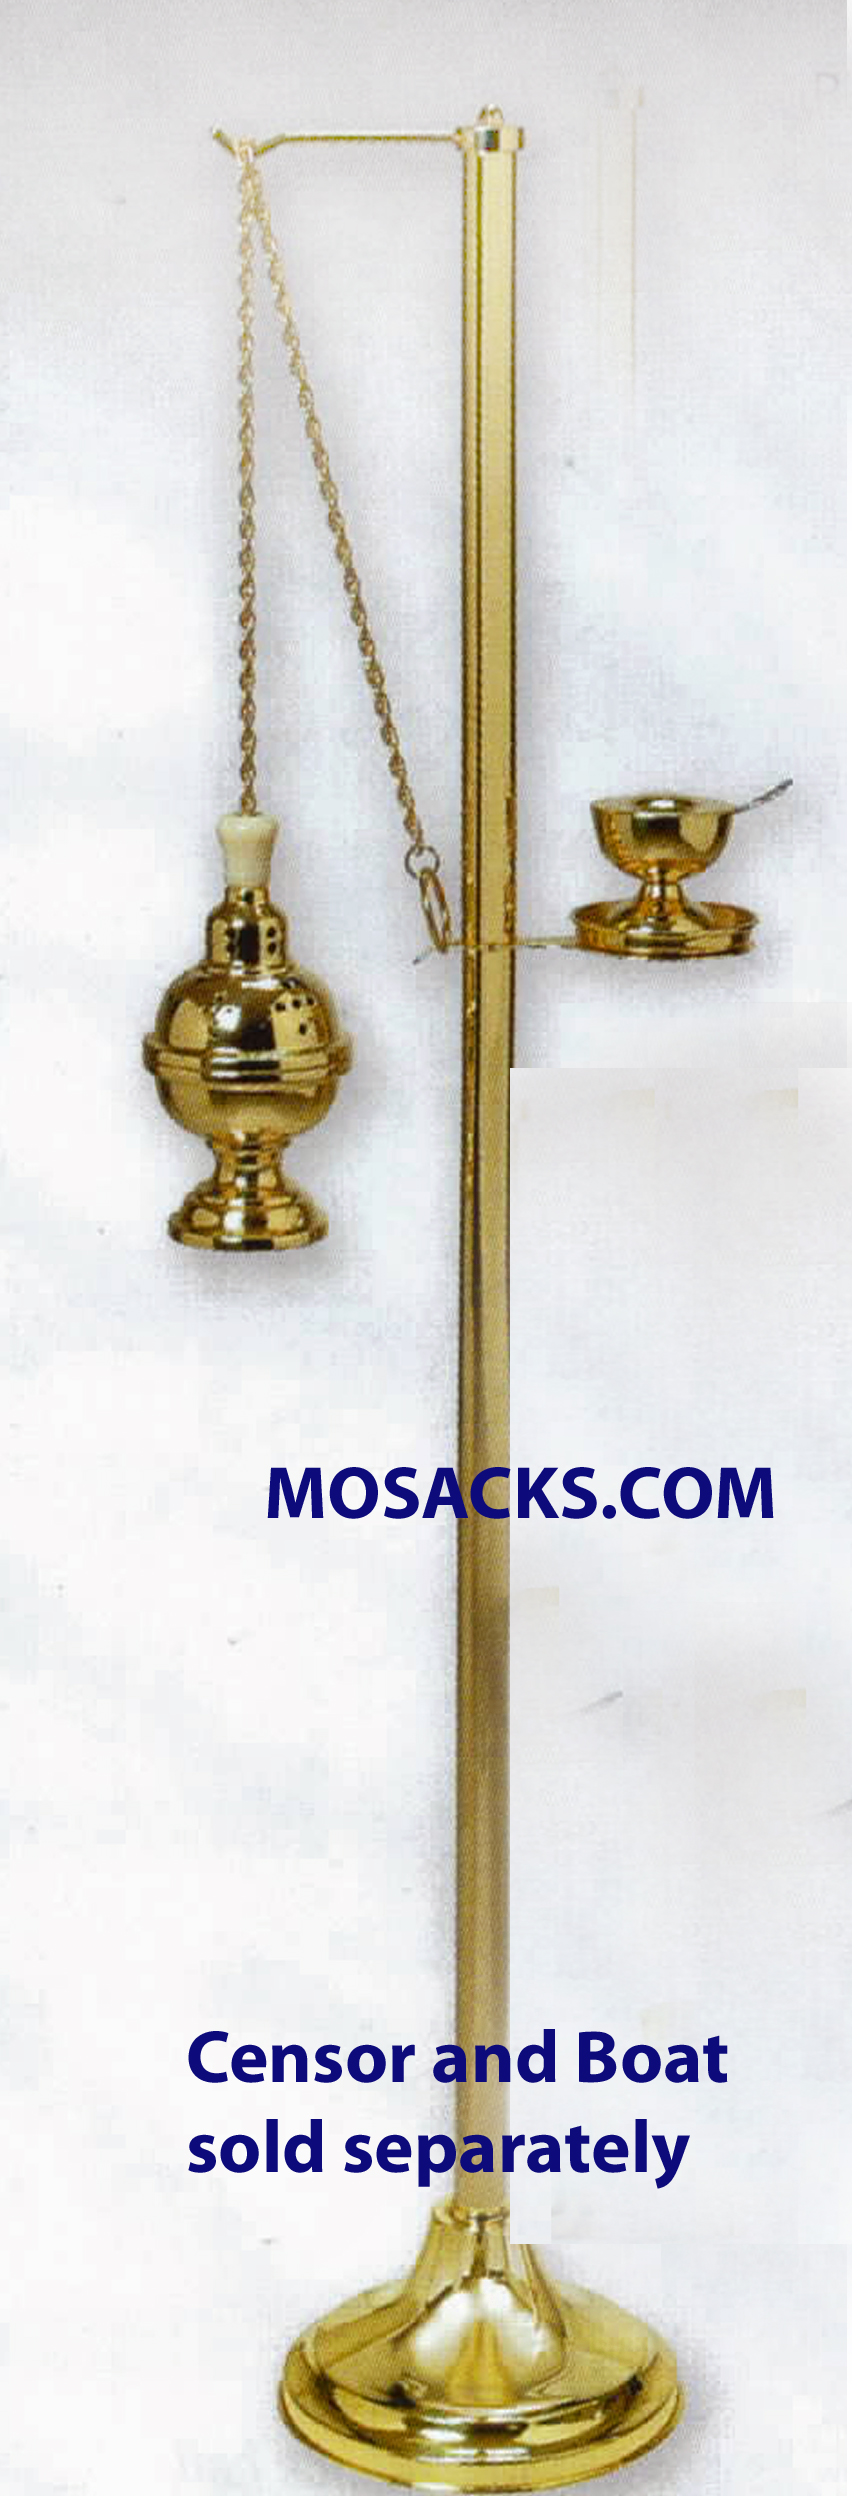 K Brand Censer Stand 50 Inch high with 9inch base-K156